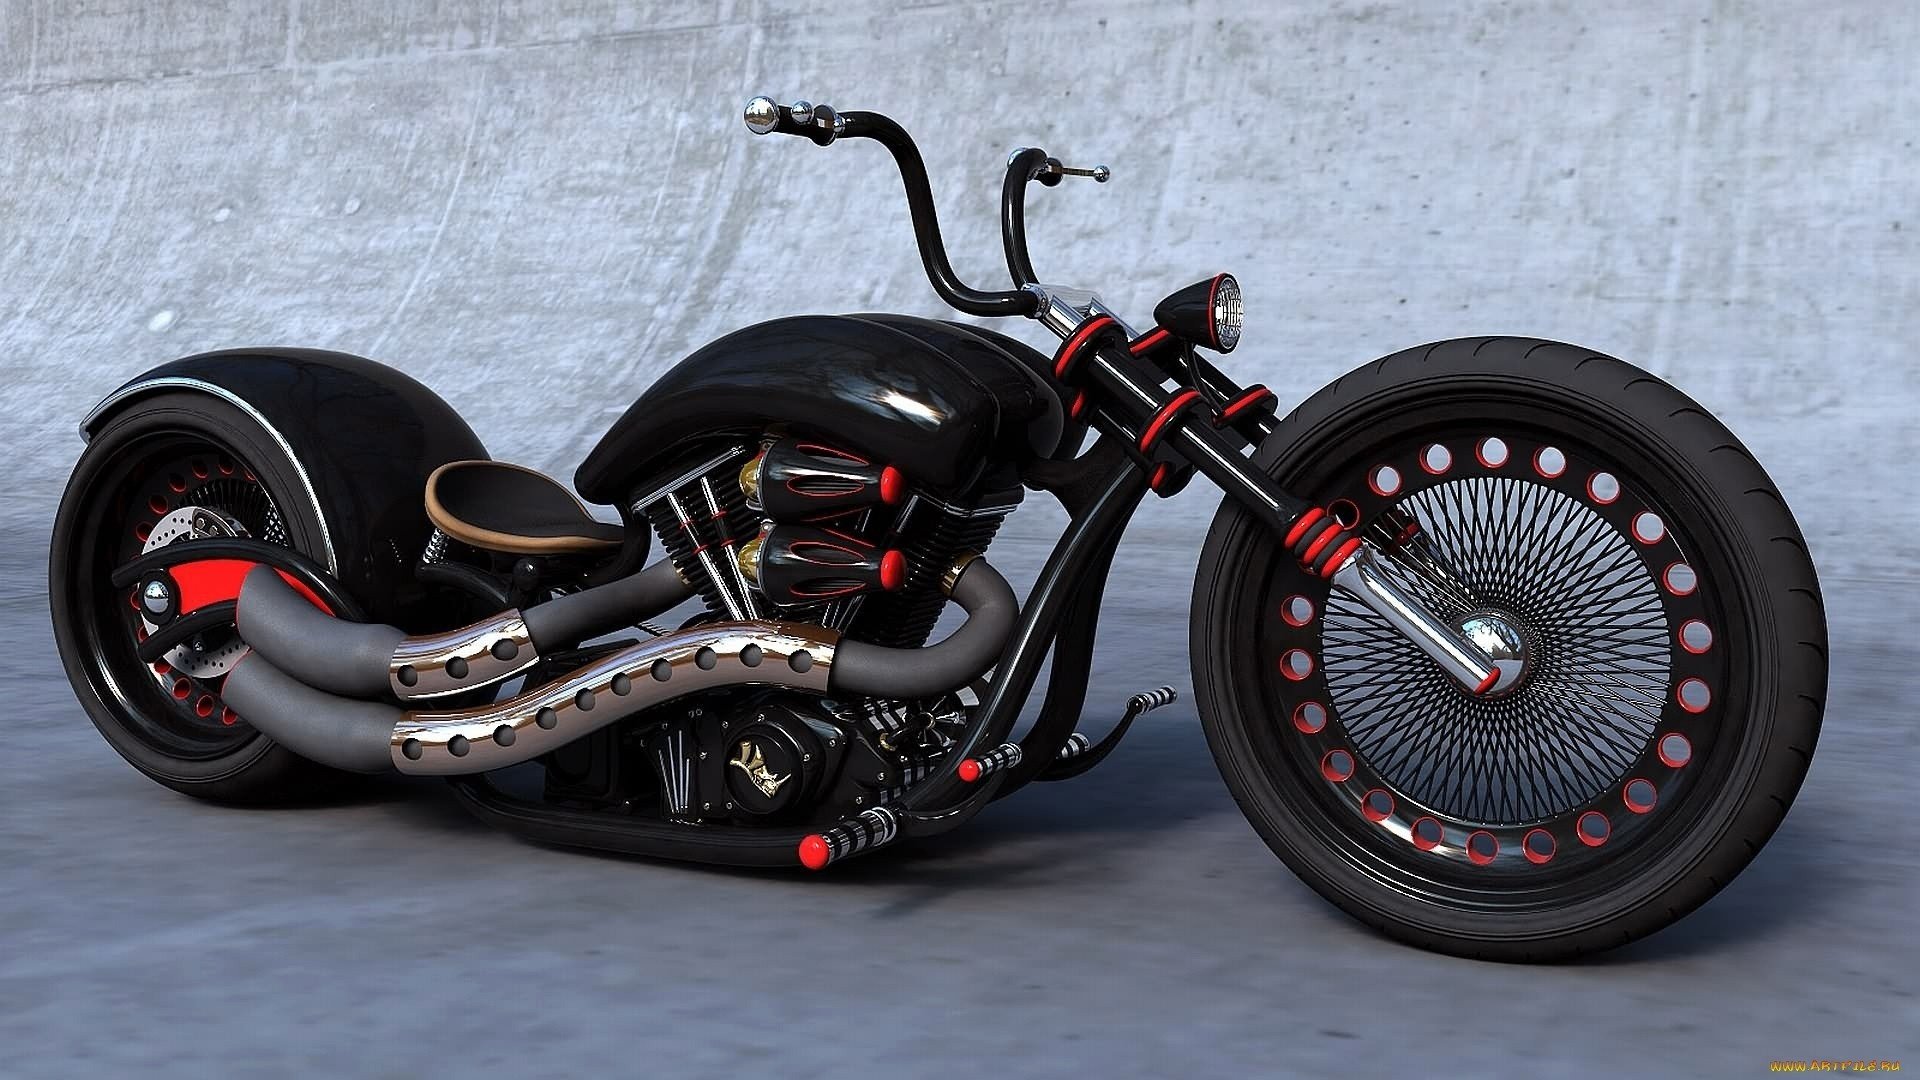 HD Wallpapers of Bike Download Free HD Wallpapers Collection